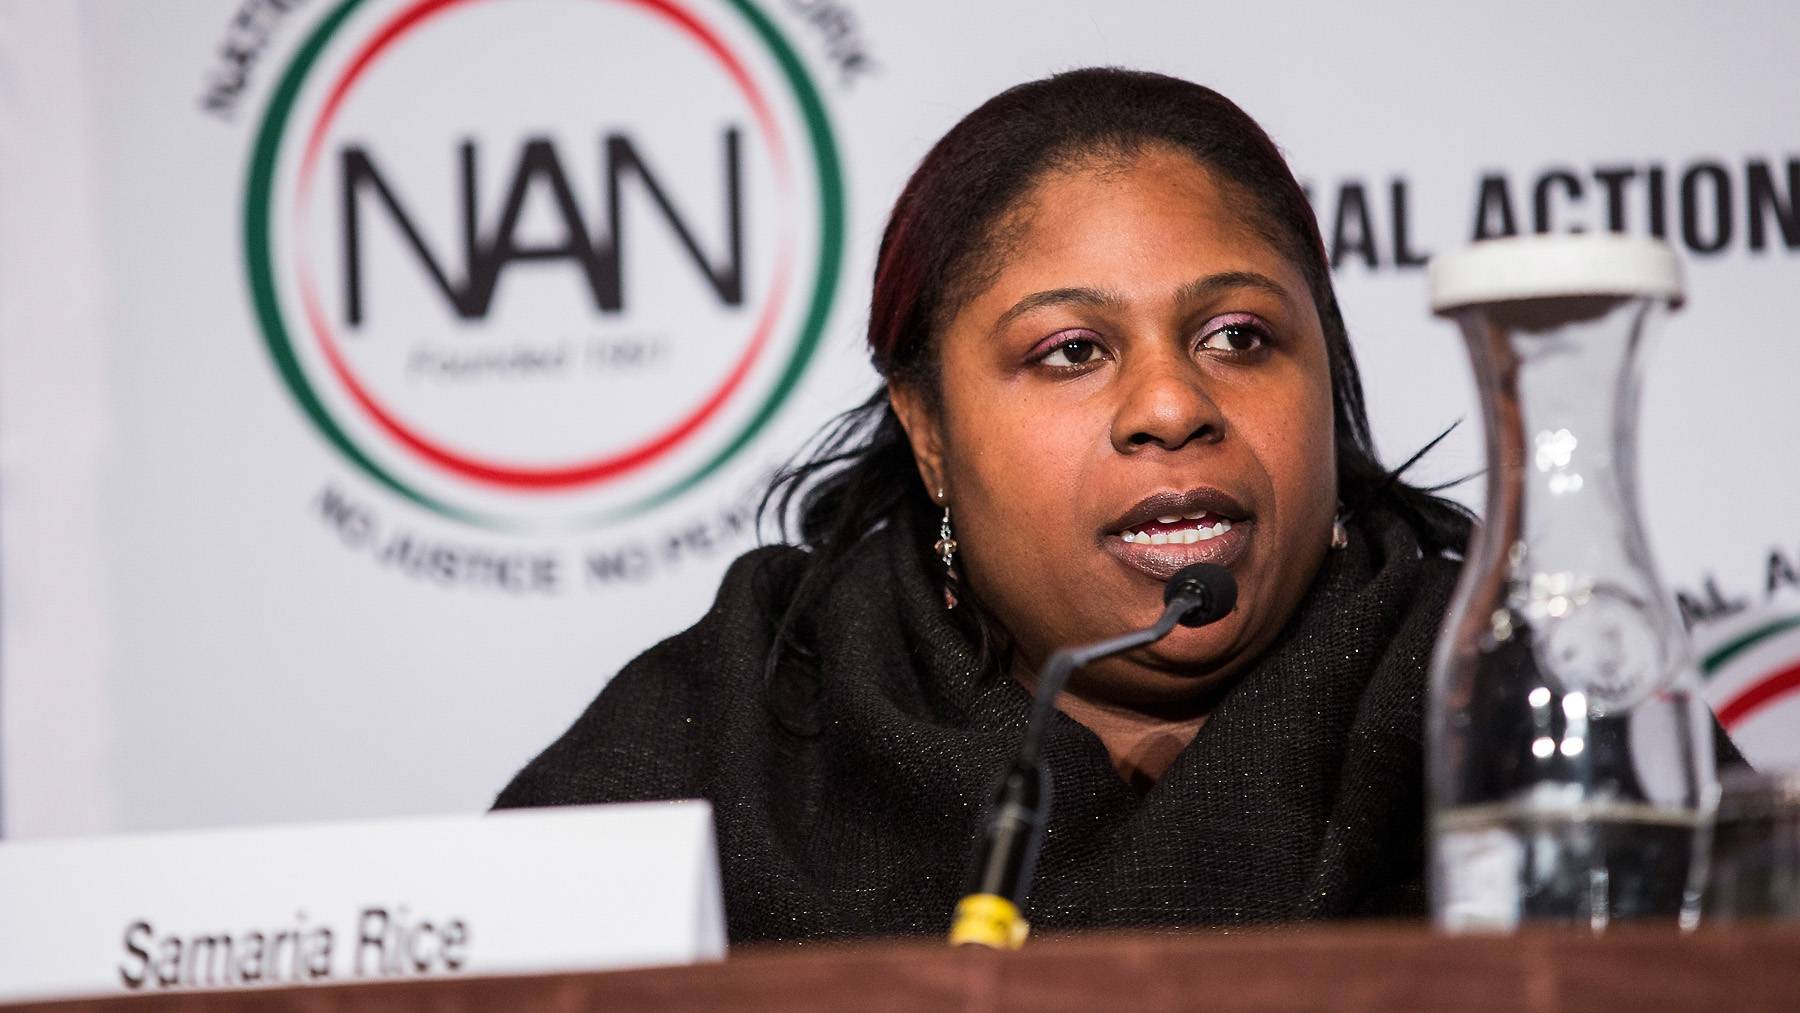 NEW YORK, NY - APRIL 08:  Samaria Rice, mother of Tamir Rice- who was shot to death by a police officer - speak on a panel titled "The Impact of Police Brutality - The Victims Speak" at the National Action Network (NAN) national convention on April 8, 2015 in New York City. Reverend Al Sharpton founded NAN in 1991; the convention hosted various politicians, organizers and religious leaders to talk about the nation's most pressing issues.  (Photo by Andrew Burton/Getty Images)